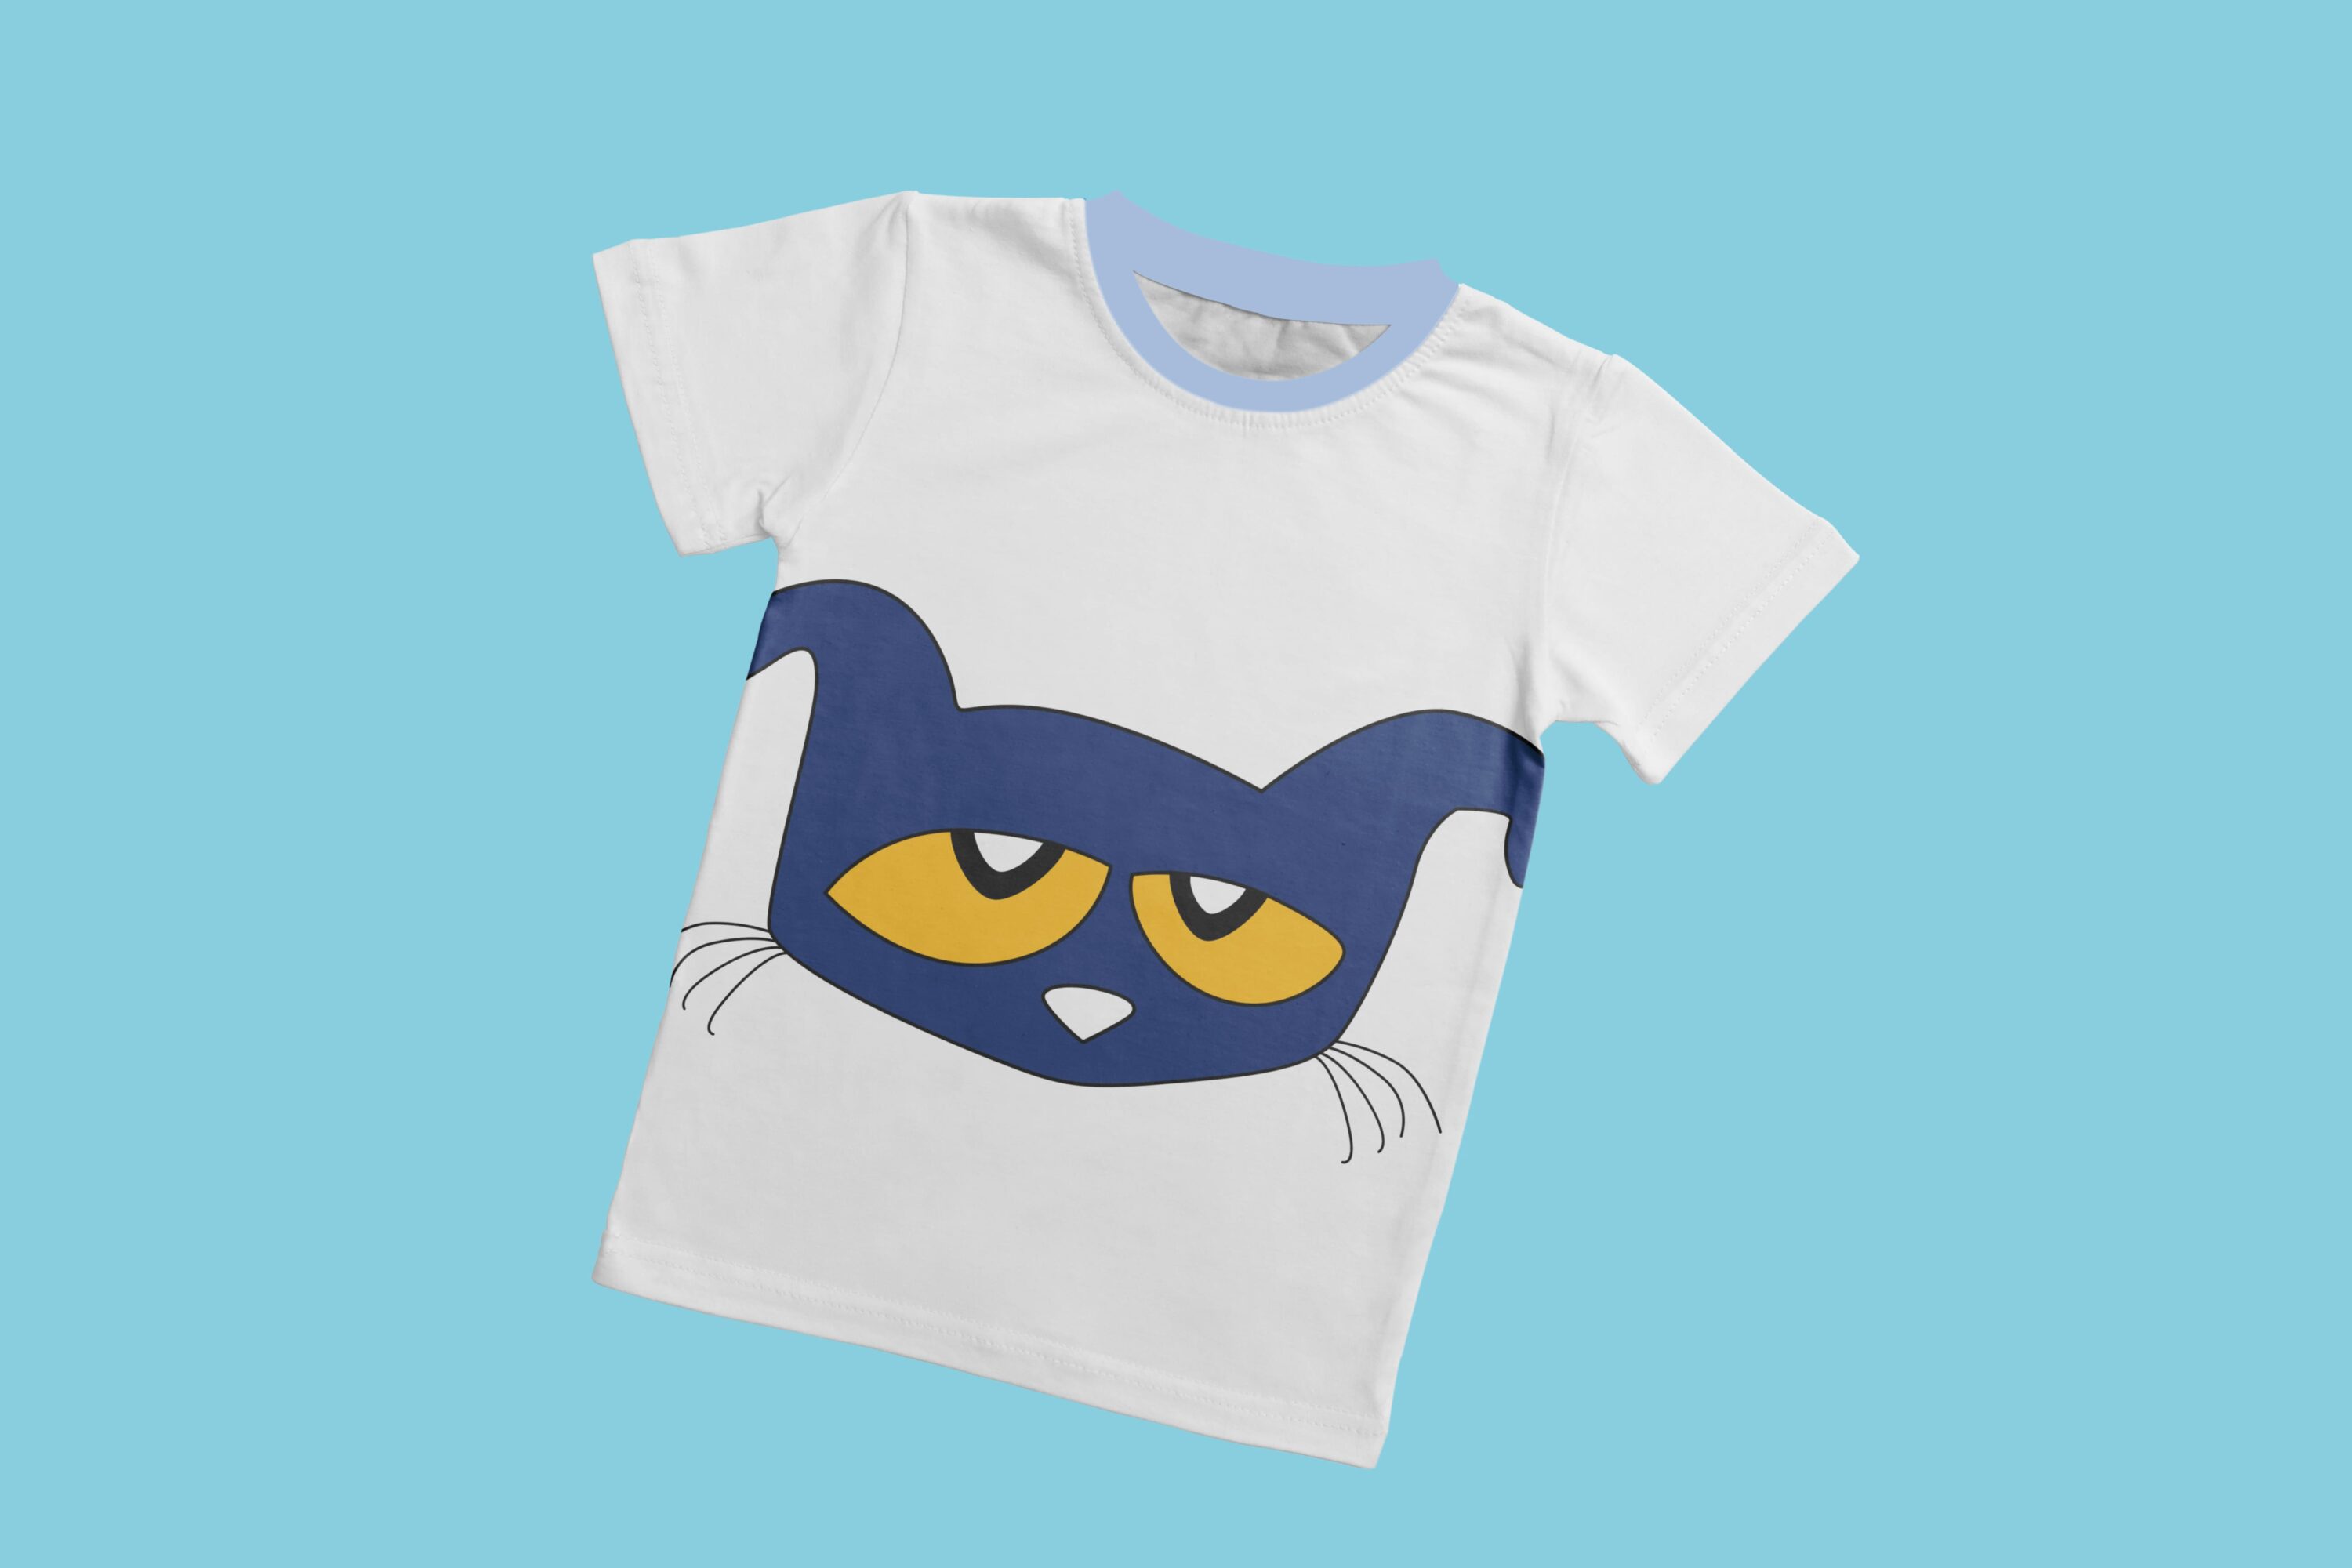 A white t-shirt with a light blue collar and the sad face of Pete the cat with yellow eyes.